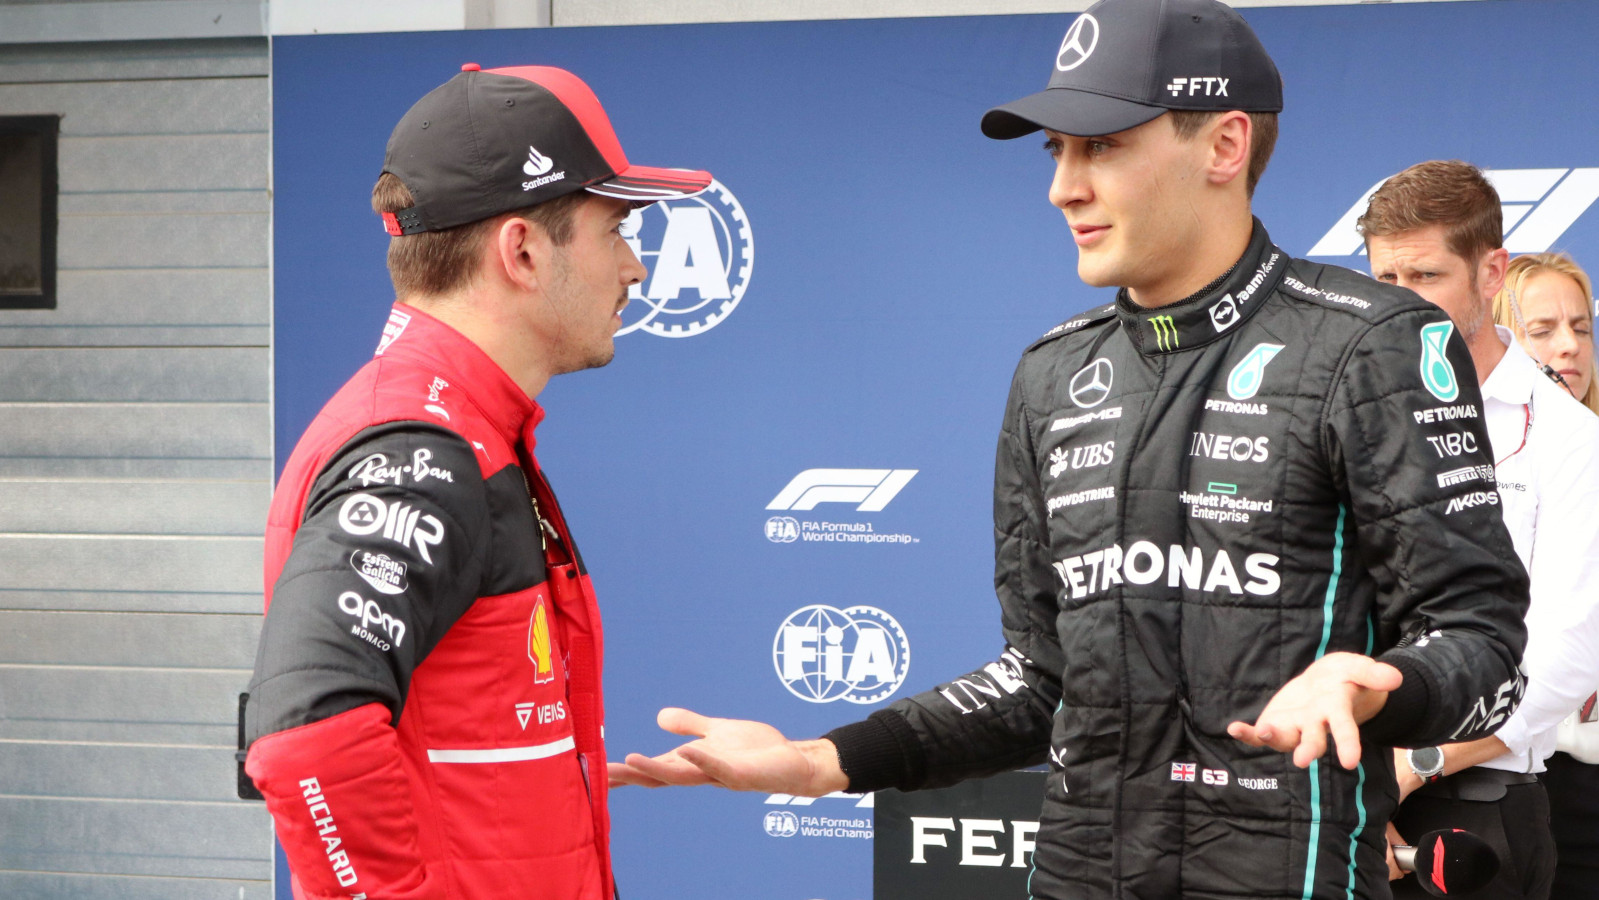 George Russell speaking with Charles Leclerc in parc ferme. Hungary July 2022